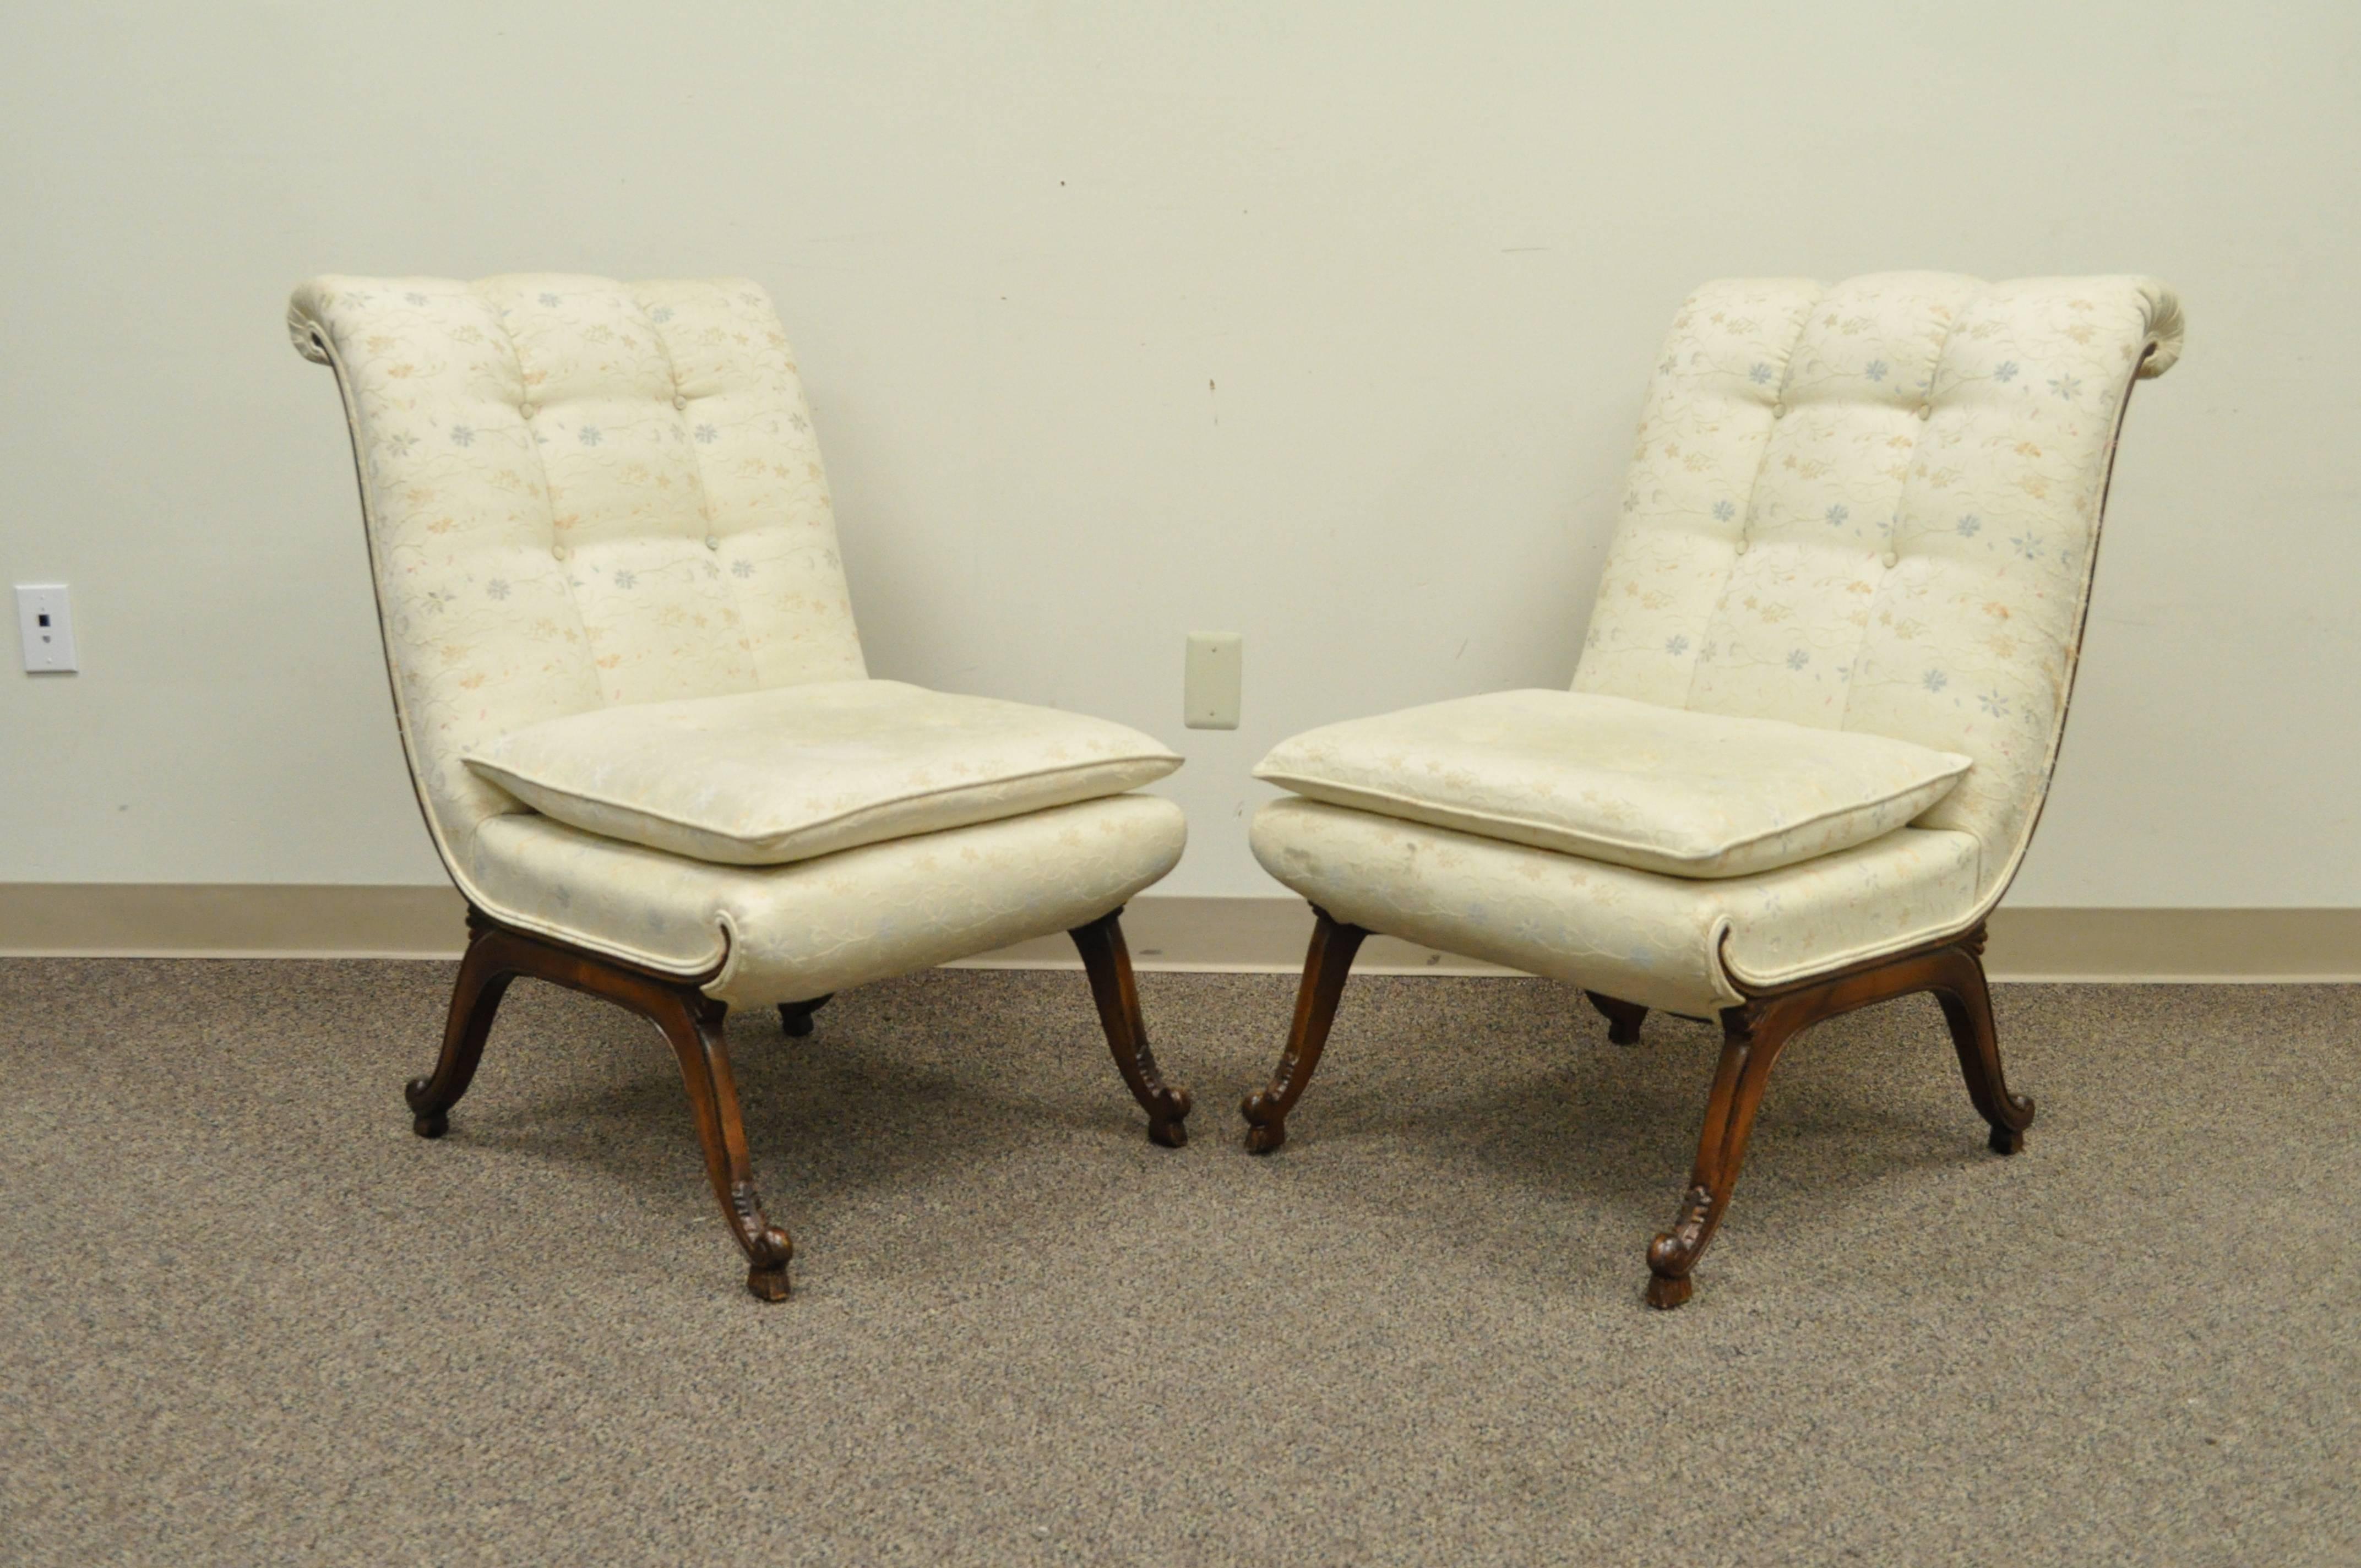 Unique pair of vintage Hollywood Regency, French style, slipper chairs in the style of Dorothy Draper. The chairs feature rolled backs, exposed wood frames, lightly carved feet, and great overall form.